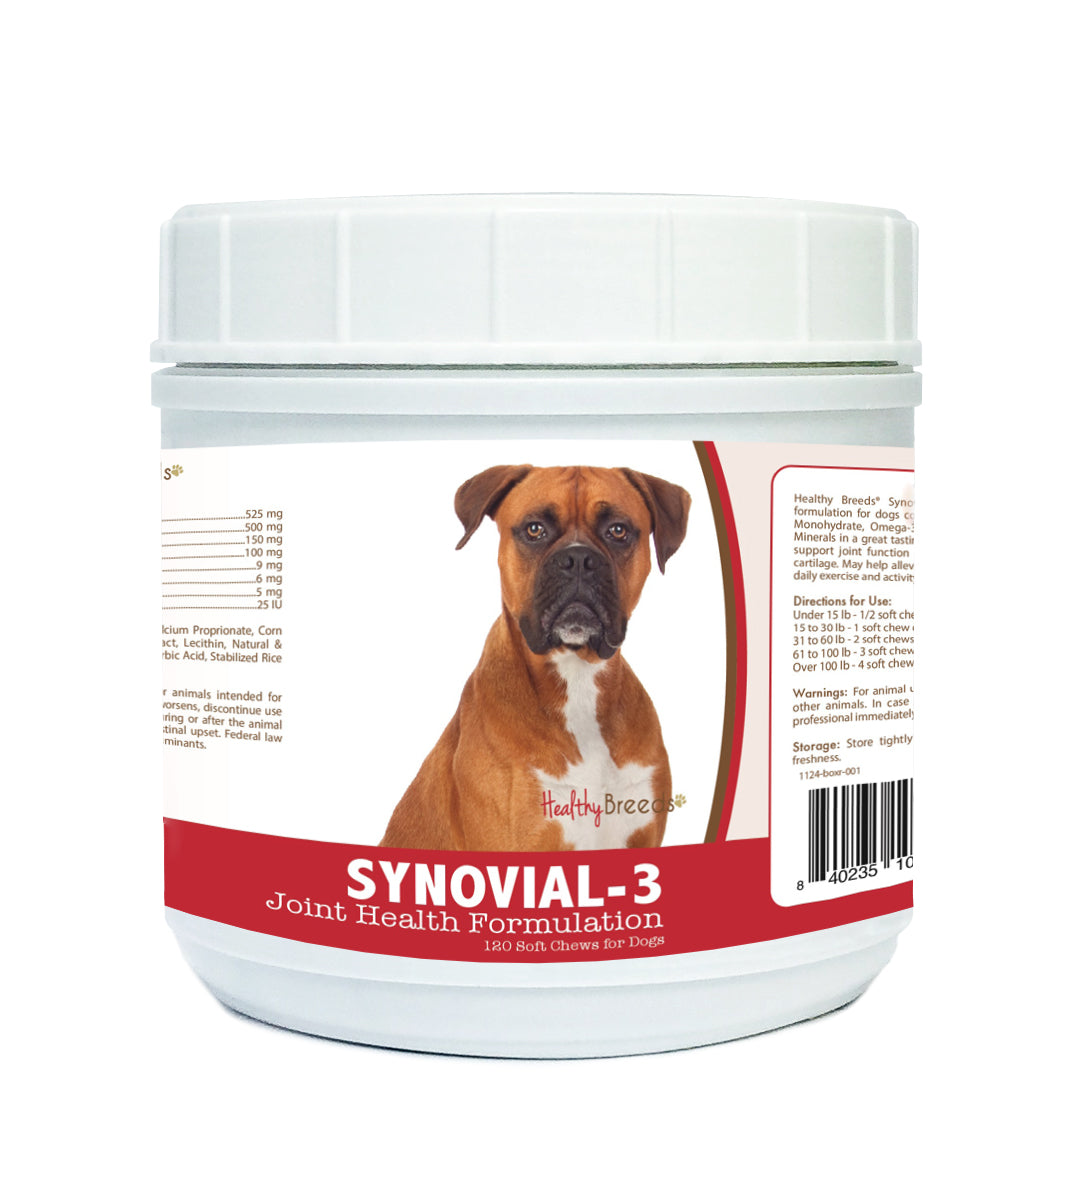 Boxer Synovial-3 Joint Health Formulation Soft Chews 120 Count